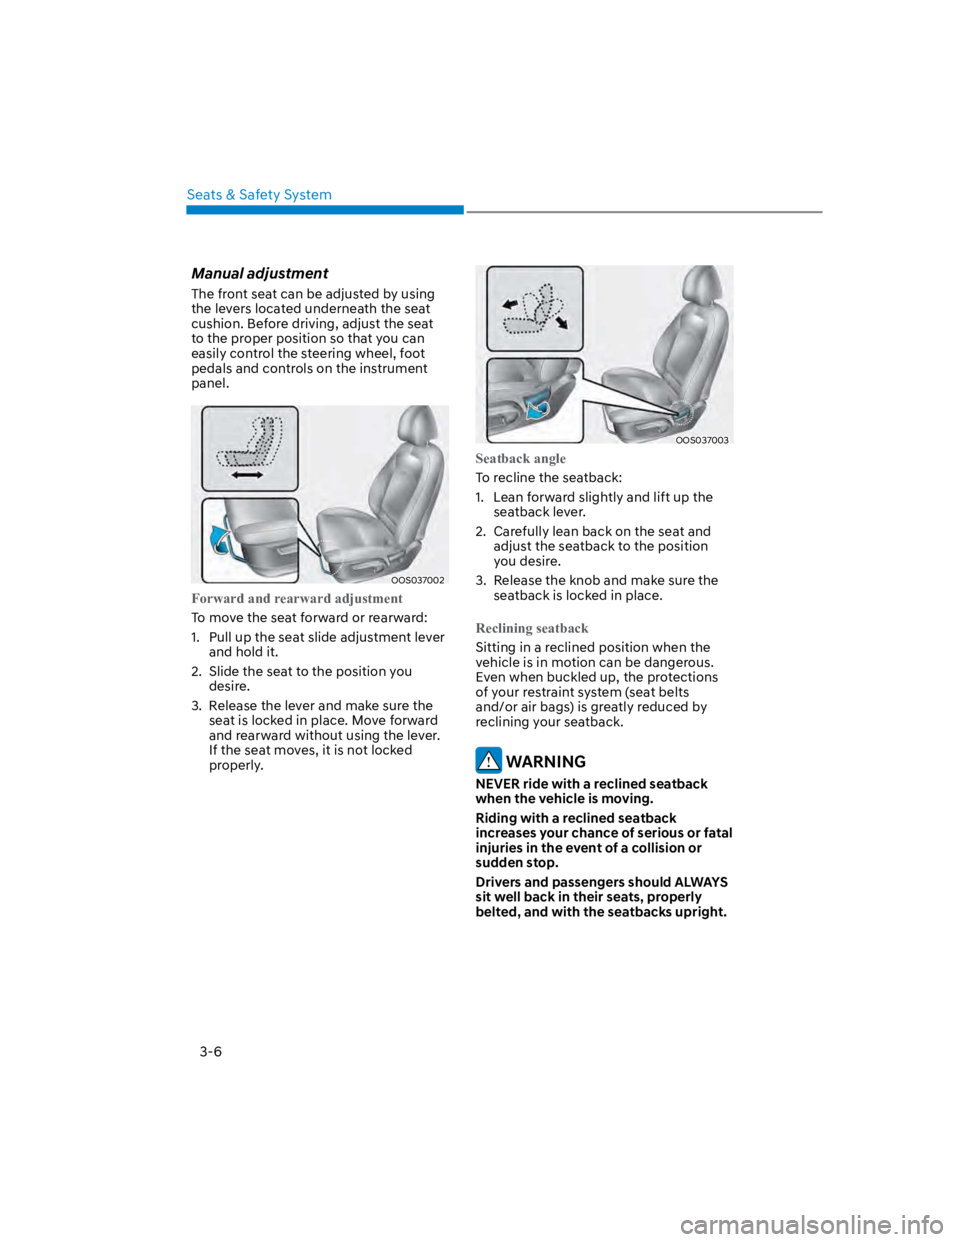 HYUNDAI KONA 2022 Owners Guide Seats & Safety System
3-6
Manual adjustment
The front seat can be adjusted by using 
the levers located underneath the seat 
cushion. Before driving, adjust the seat 
to the proper position so that yo